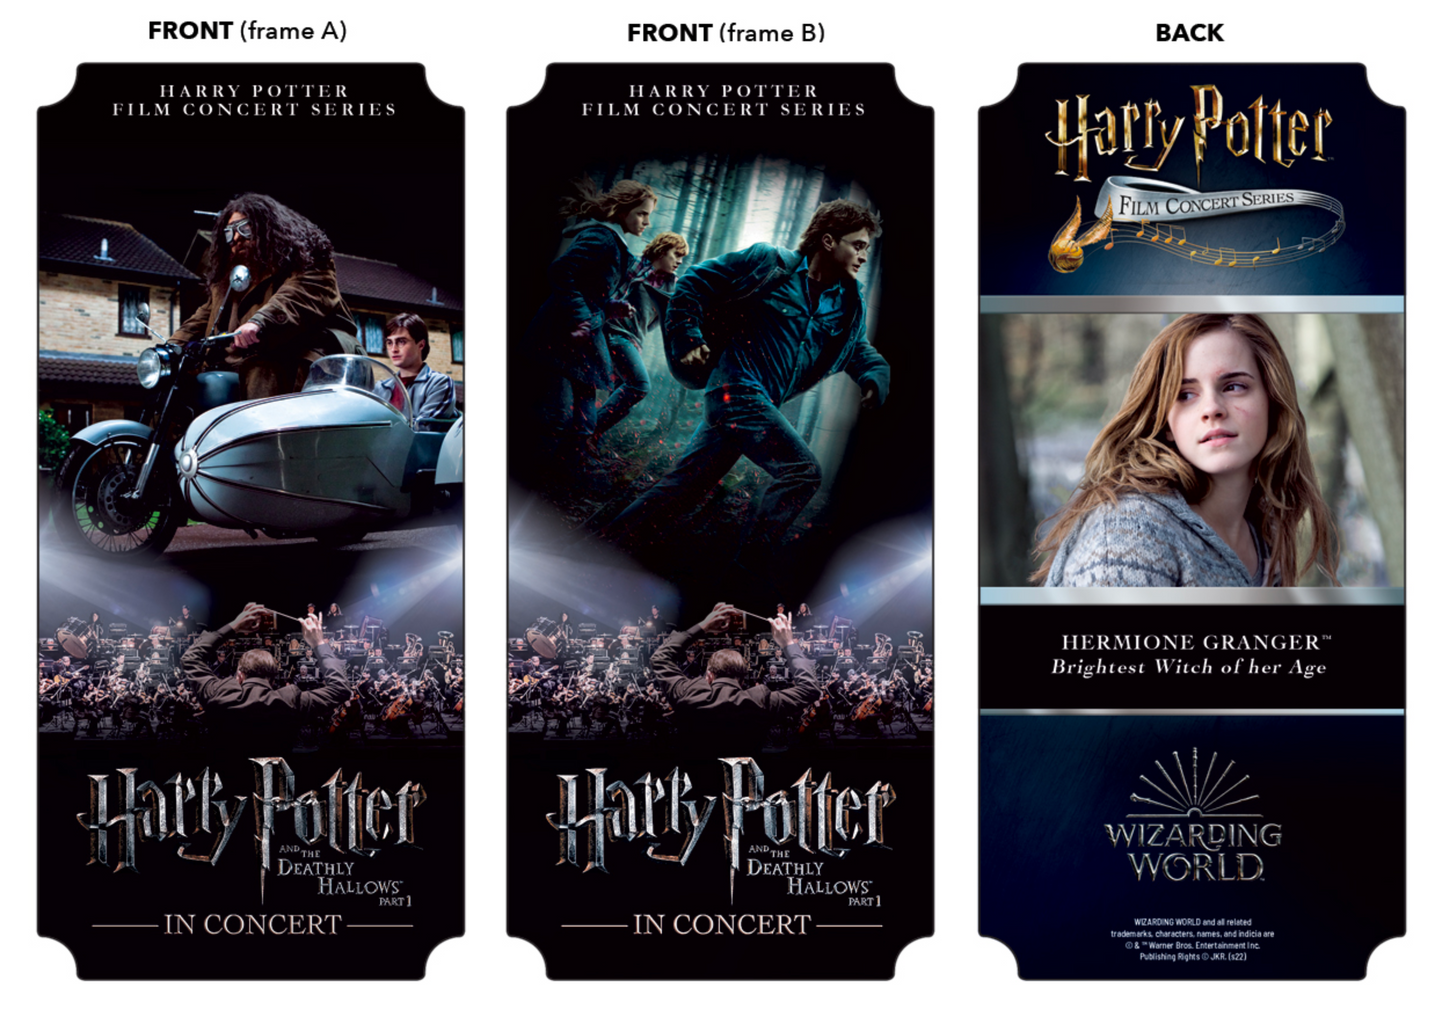 Harry Potter and the Deathly Hallows™ Part 1 in Concert Souvenir Ticket